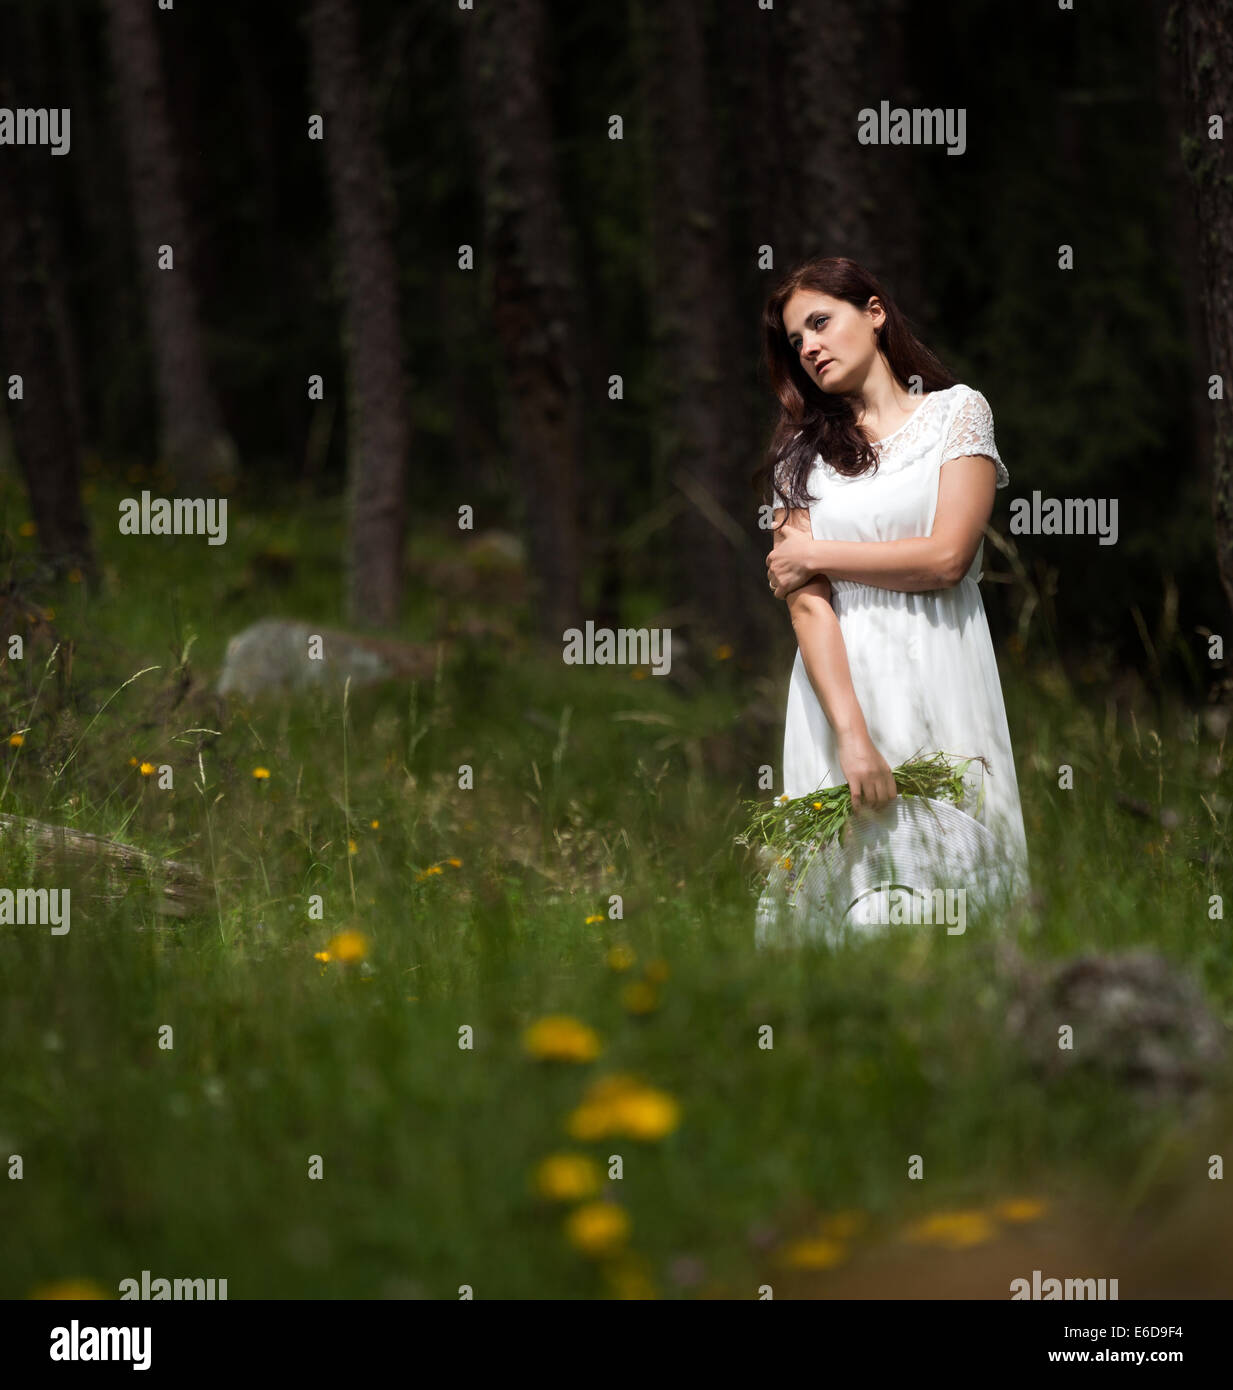 Woman with long hair in white dress and white hat in hand walking in the forest holding a bunch of flowers Stock Photo